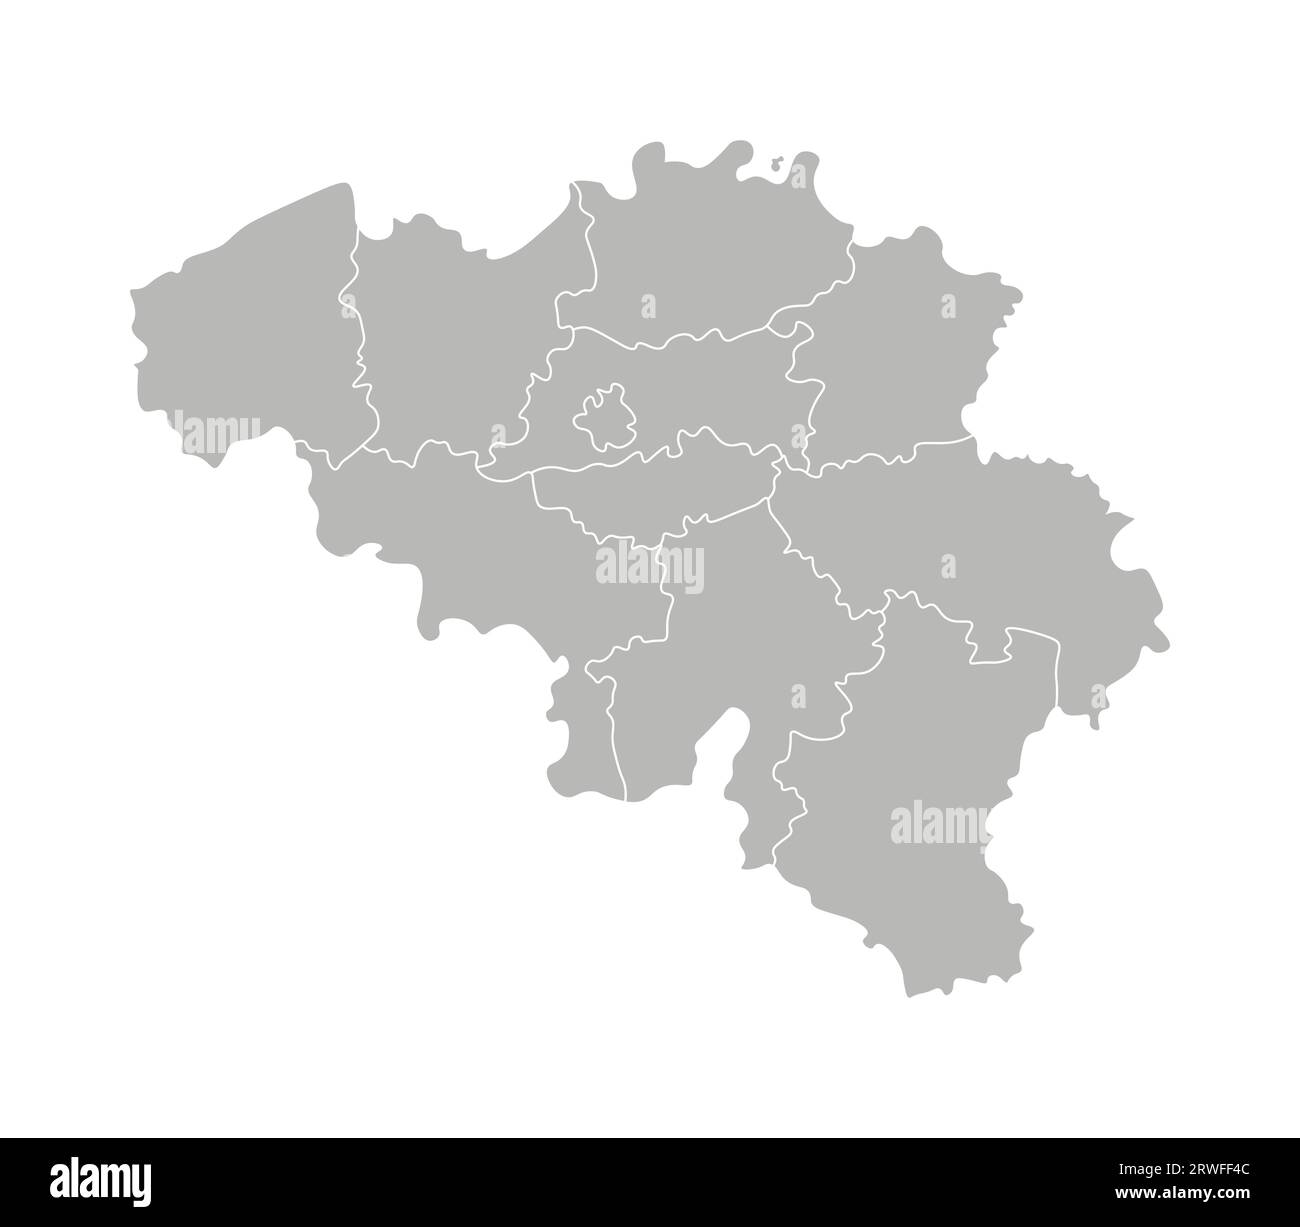 Vector isolated illustration of simplified administrative map of Belgium. Borders of the provinces (regions). Grey silhouettes. White outline. Stock Vector